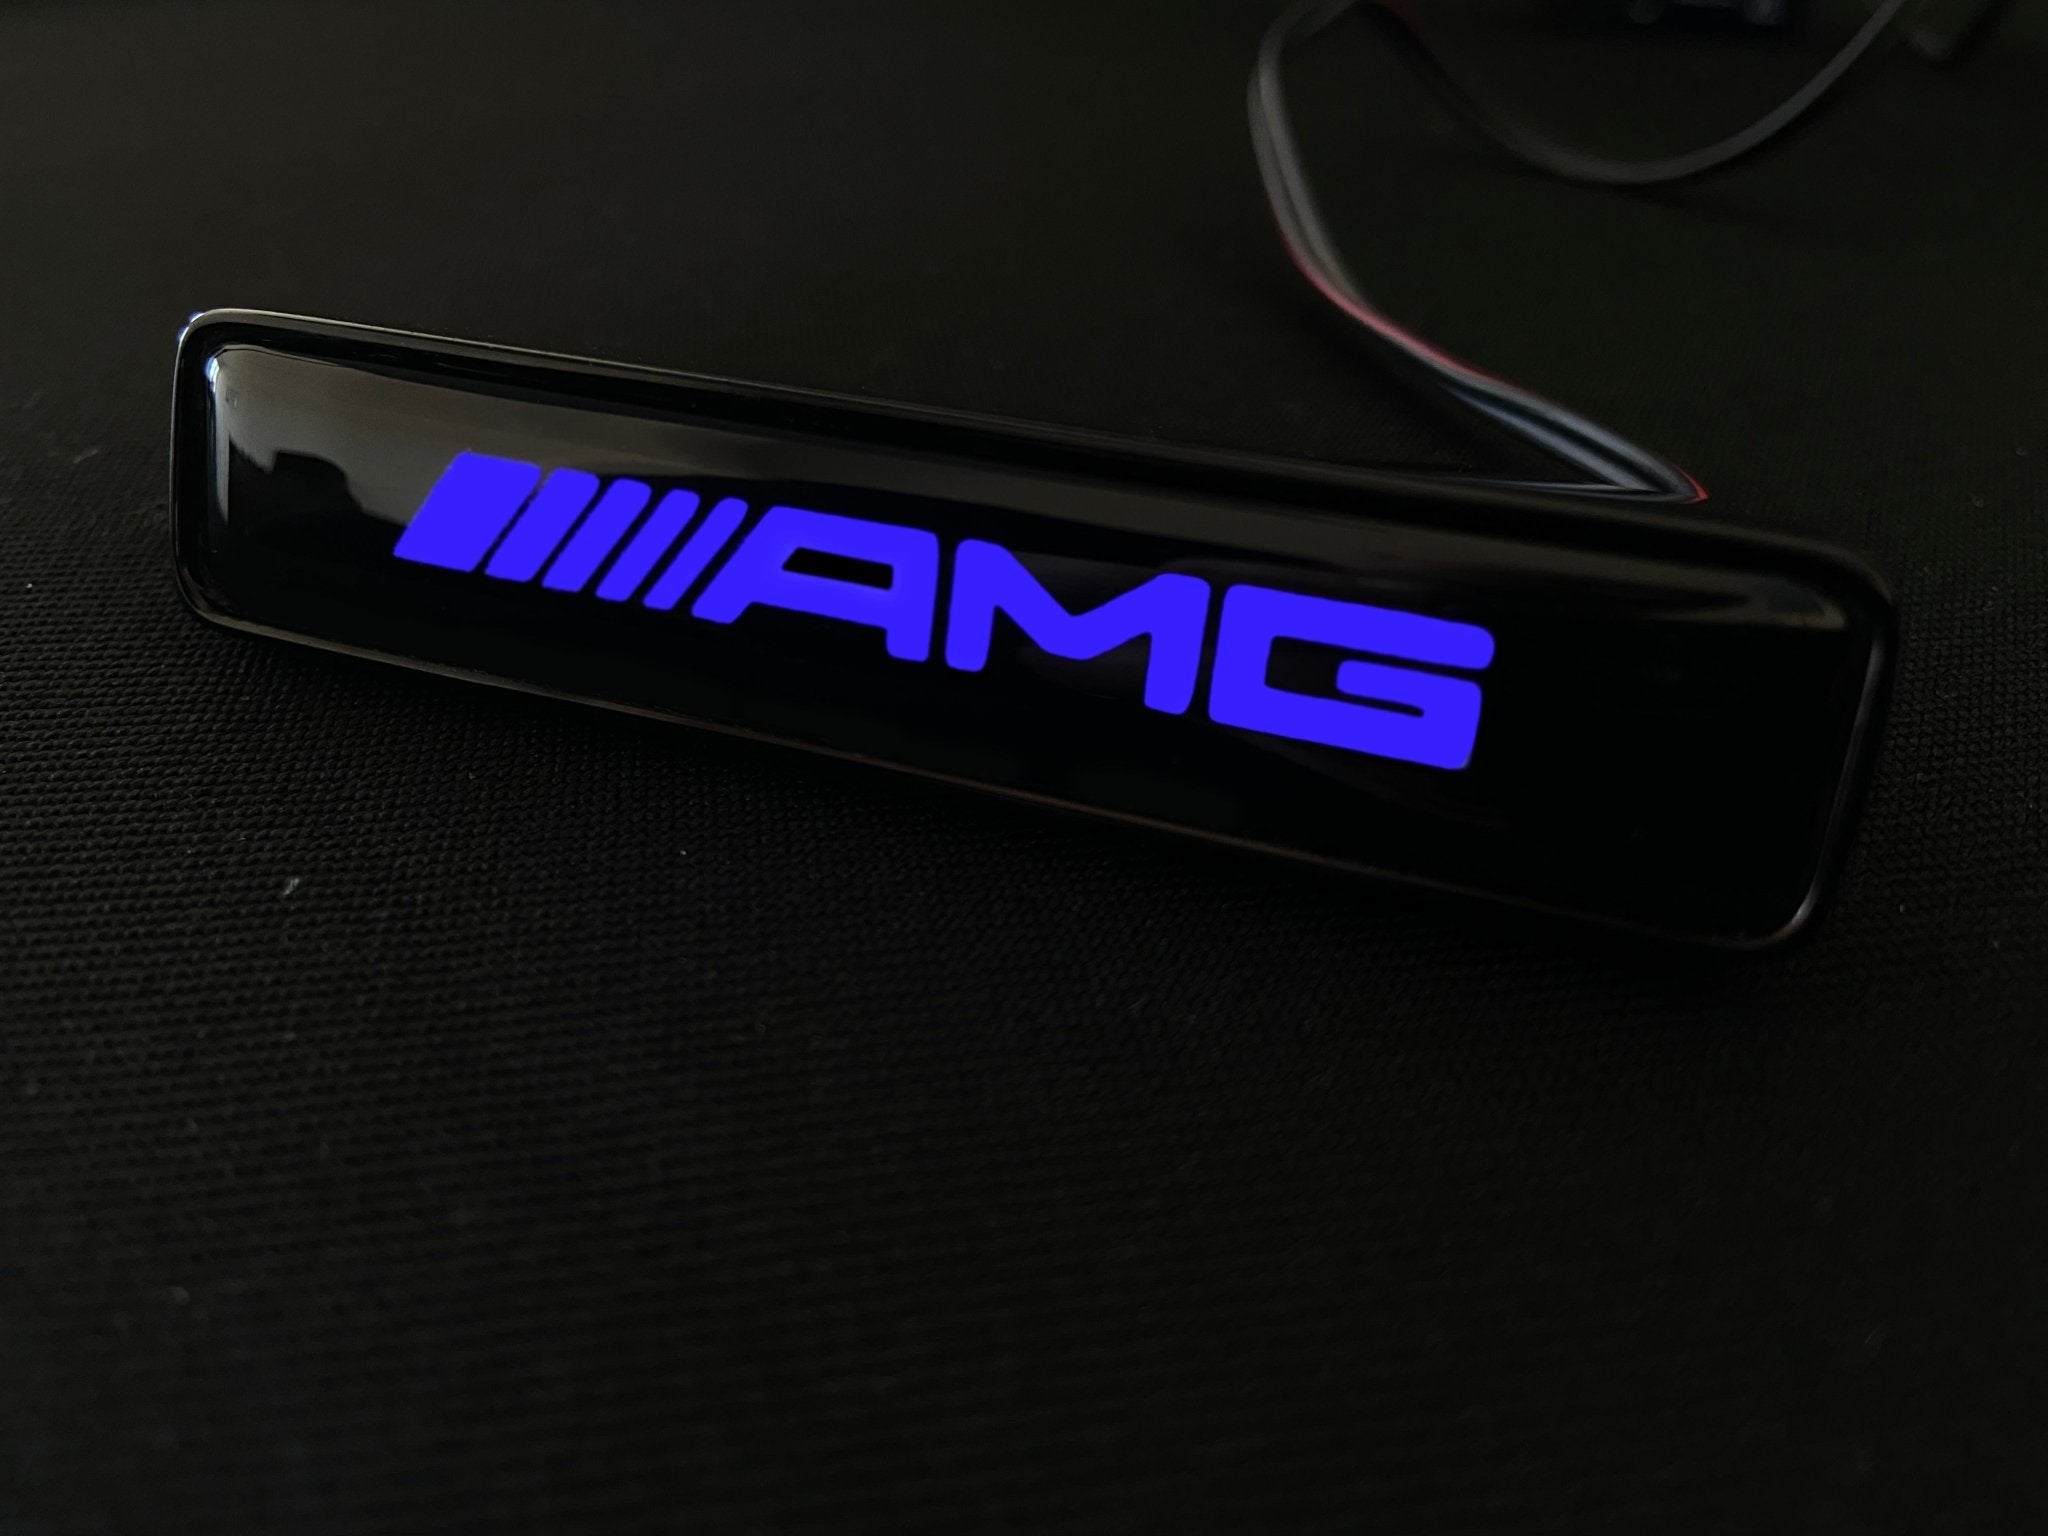 AMG style Front Grille Blue LED Illuminated Logo Badge Emblem for Mercedes Benz G-Wagon G-Class W463 W463A W464